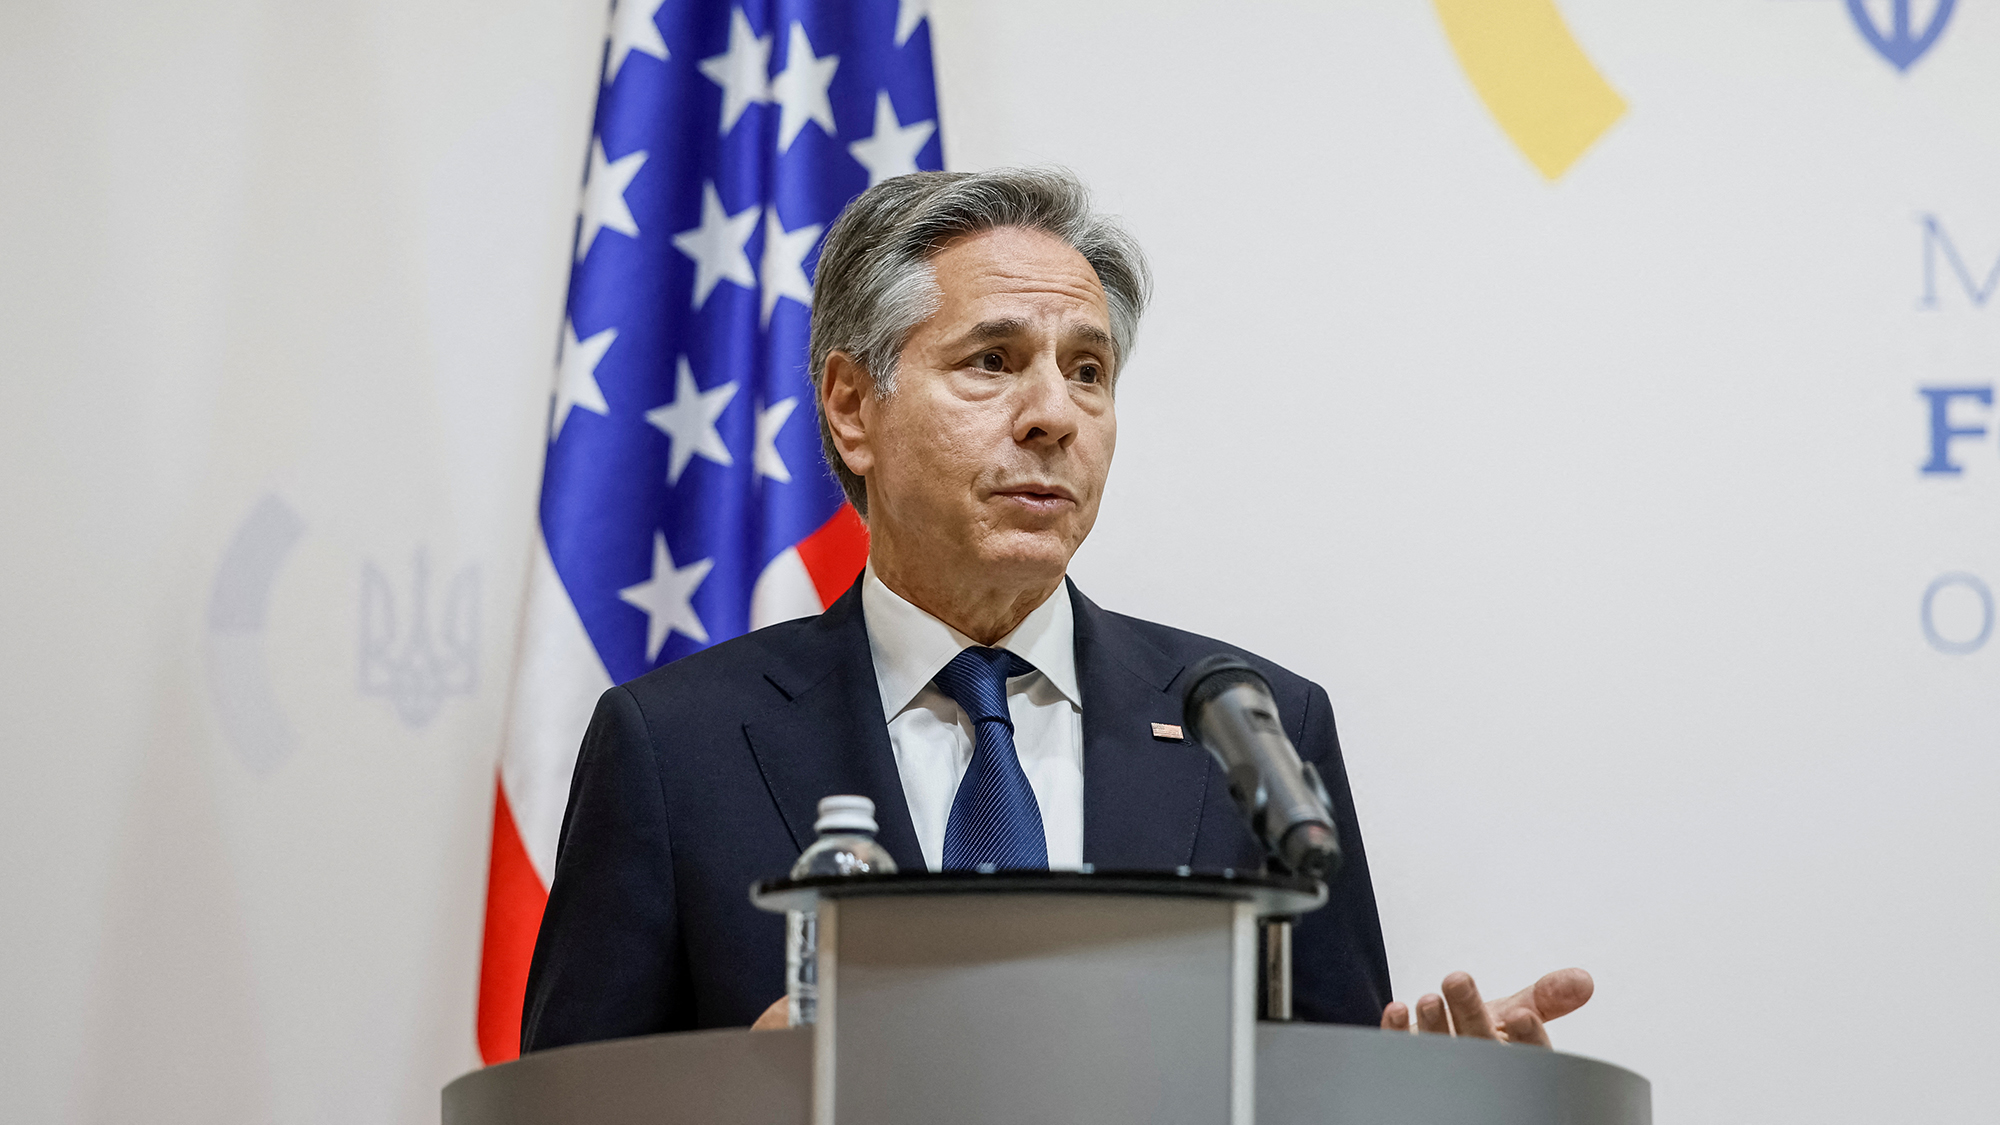 U.S. Secretary of State Antony Blinken speaks during a joint press conference with Ukrainian Foreign Minister Dmytro Kuleba in Kyiv, Ukraine, on May 15.